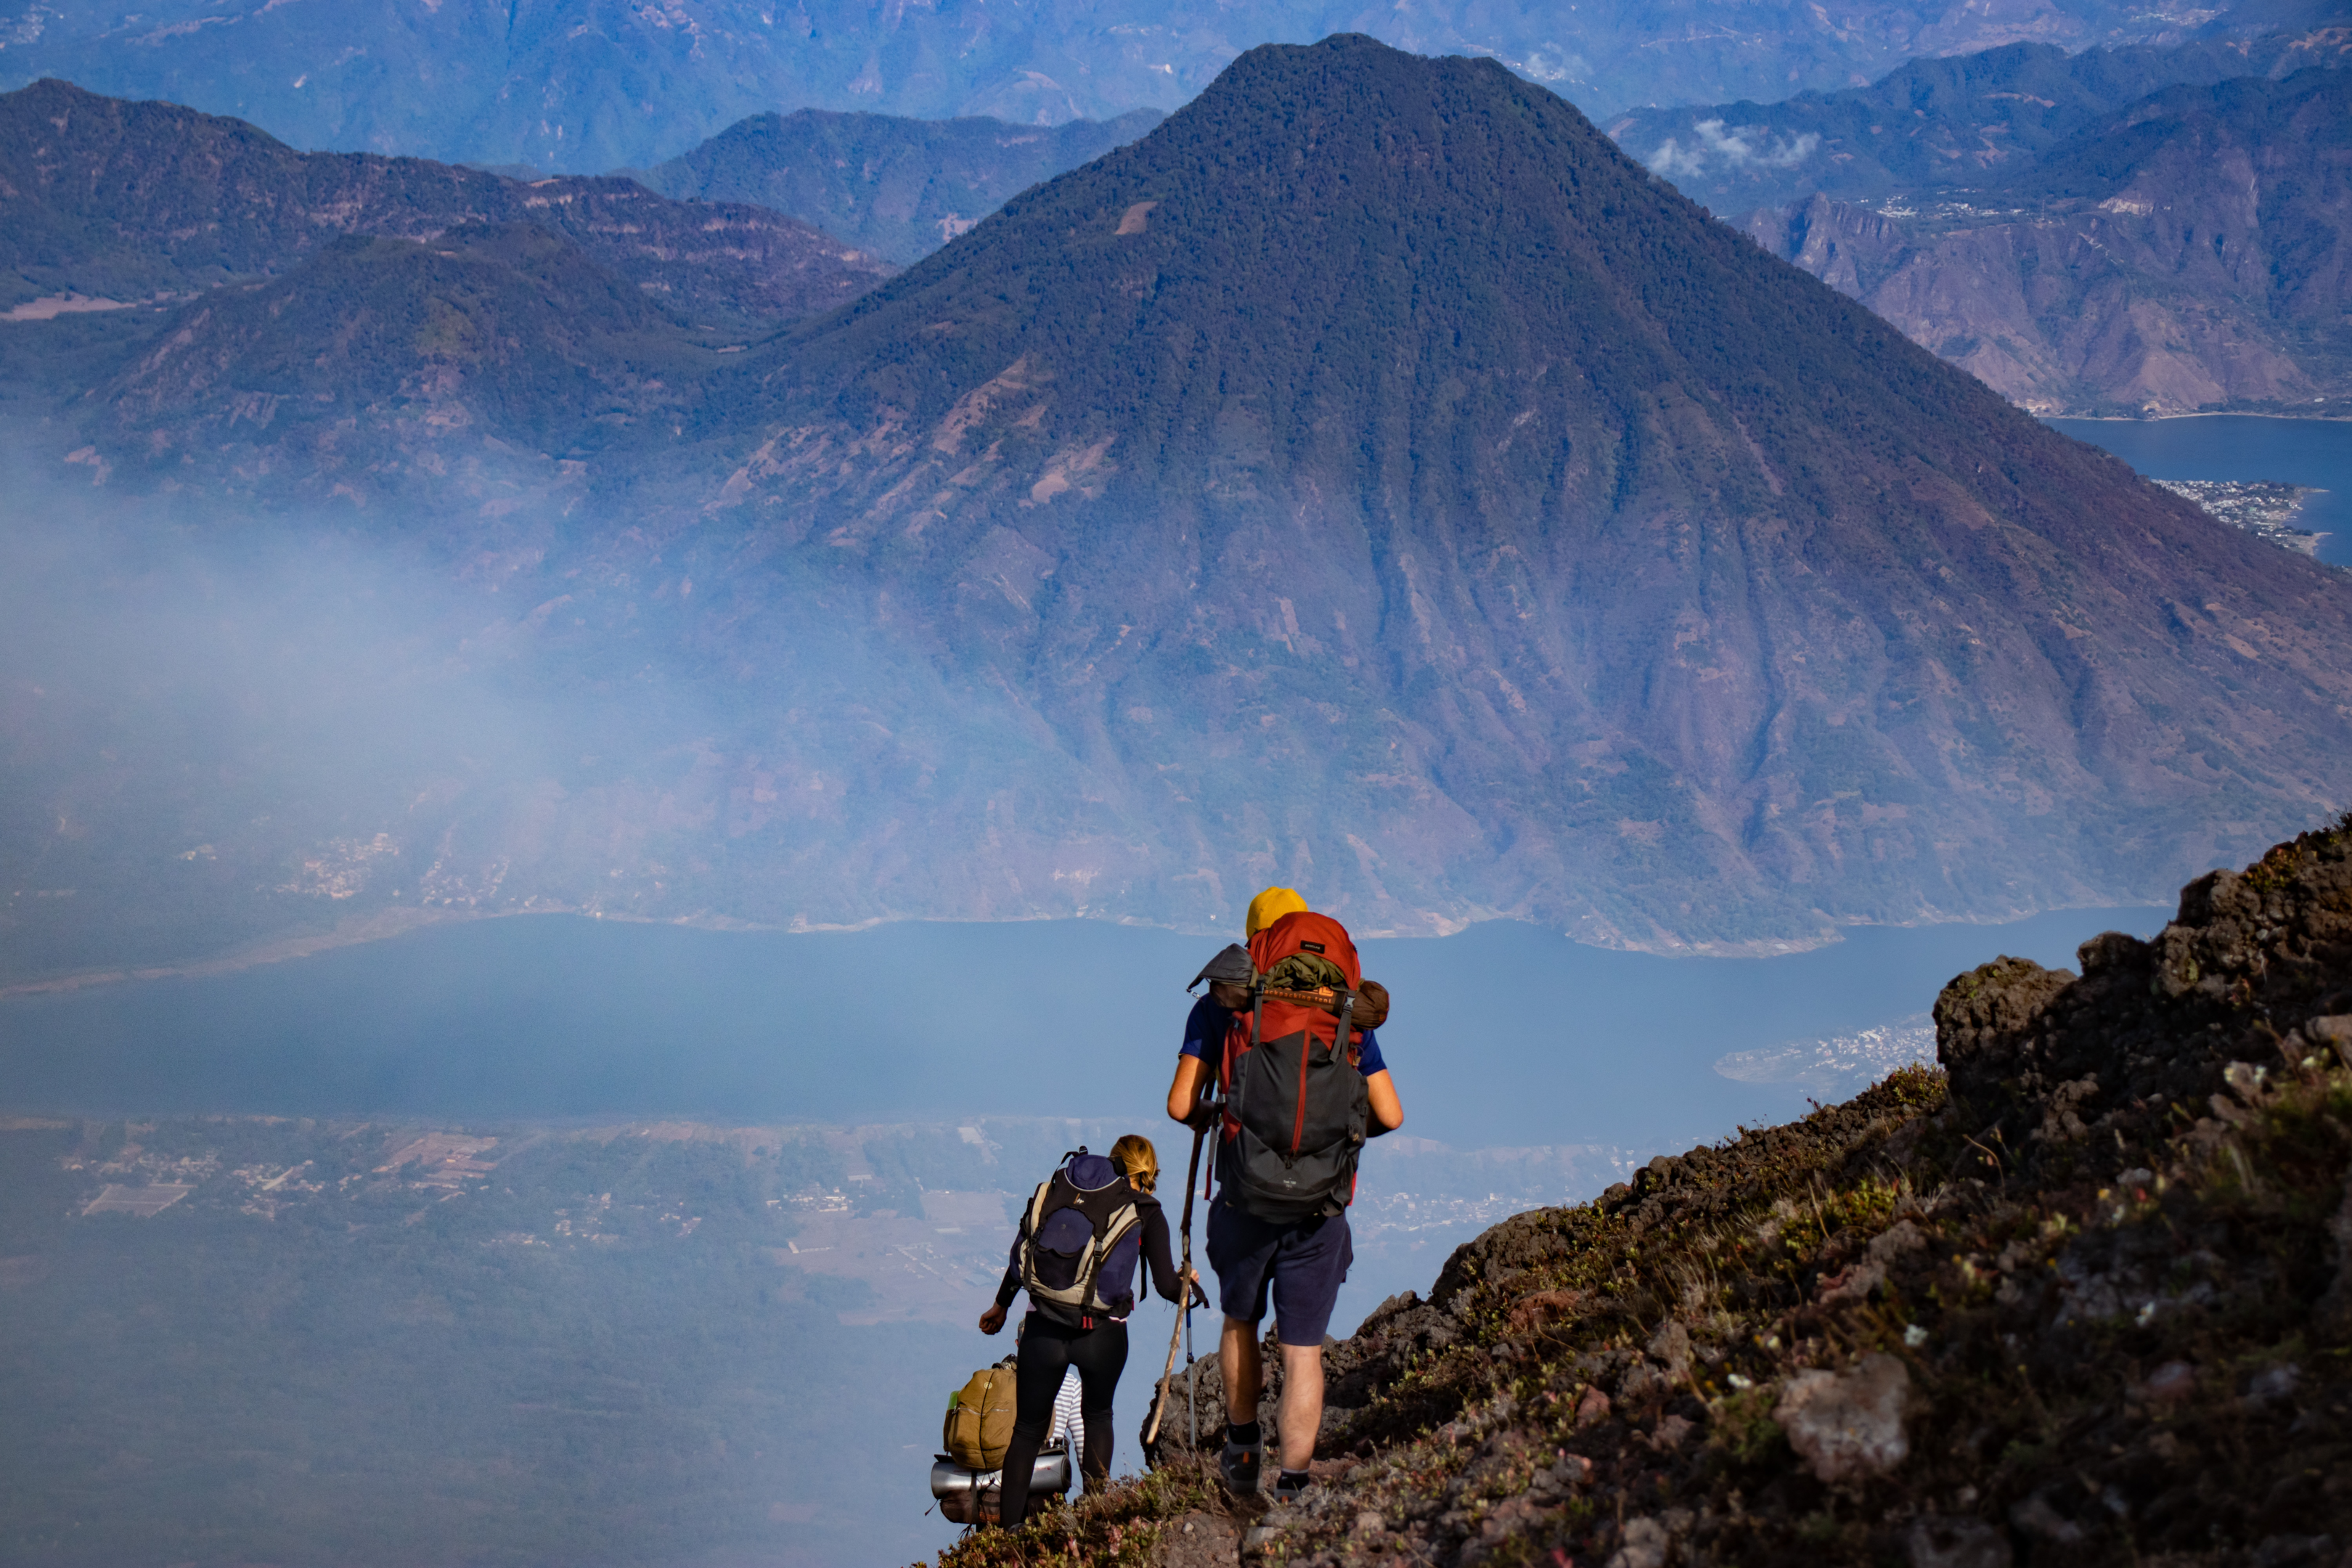 Hikers just above the clouds of Volcan Atitlan.